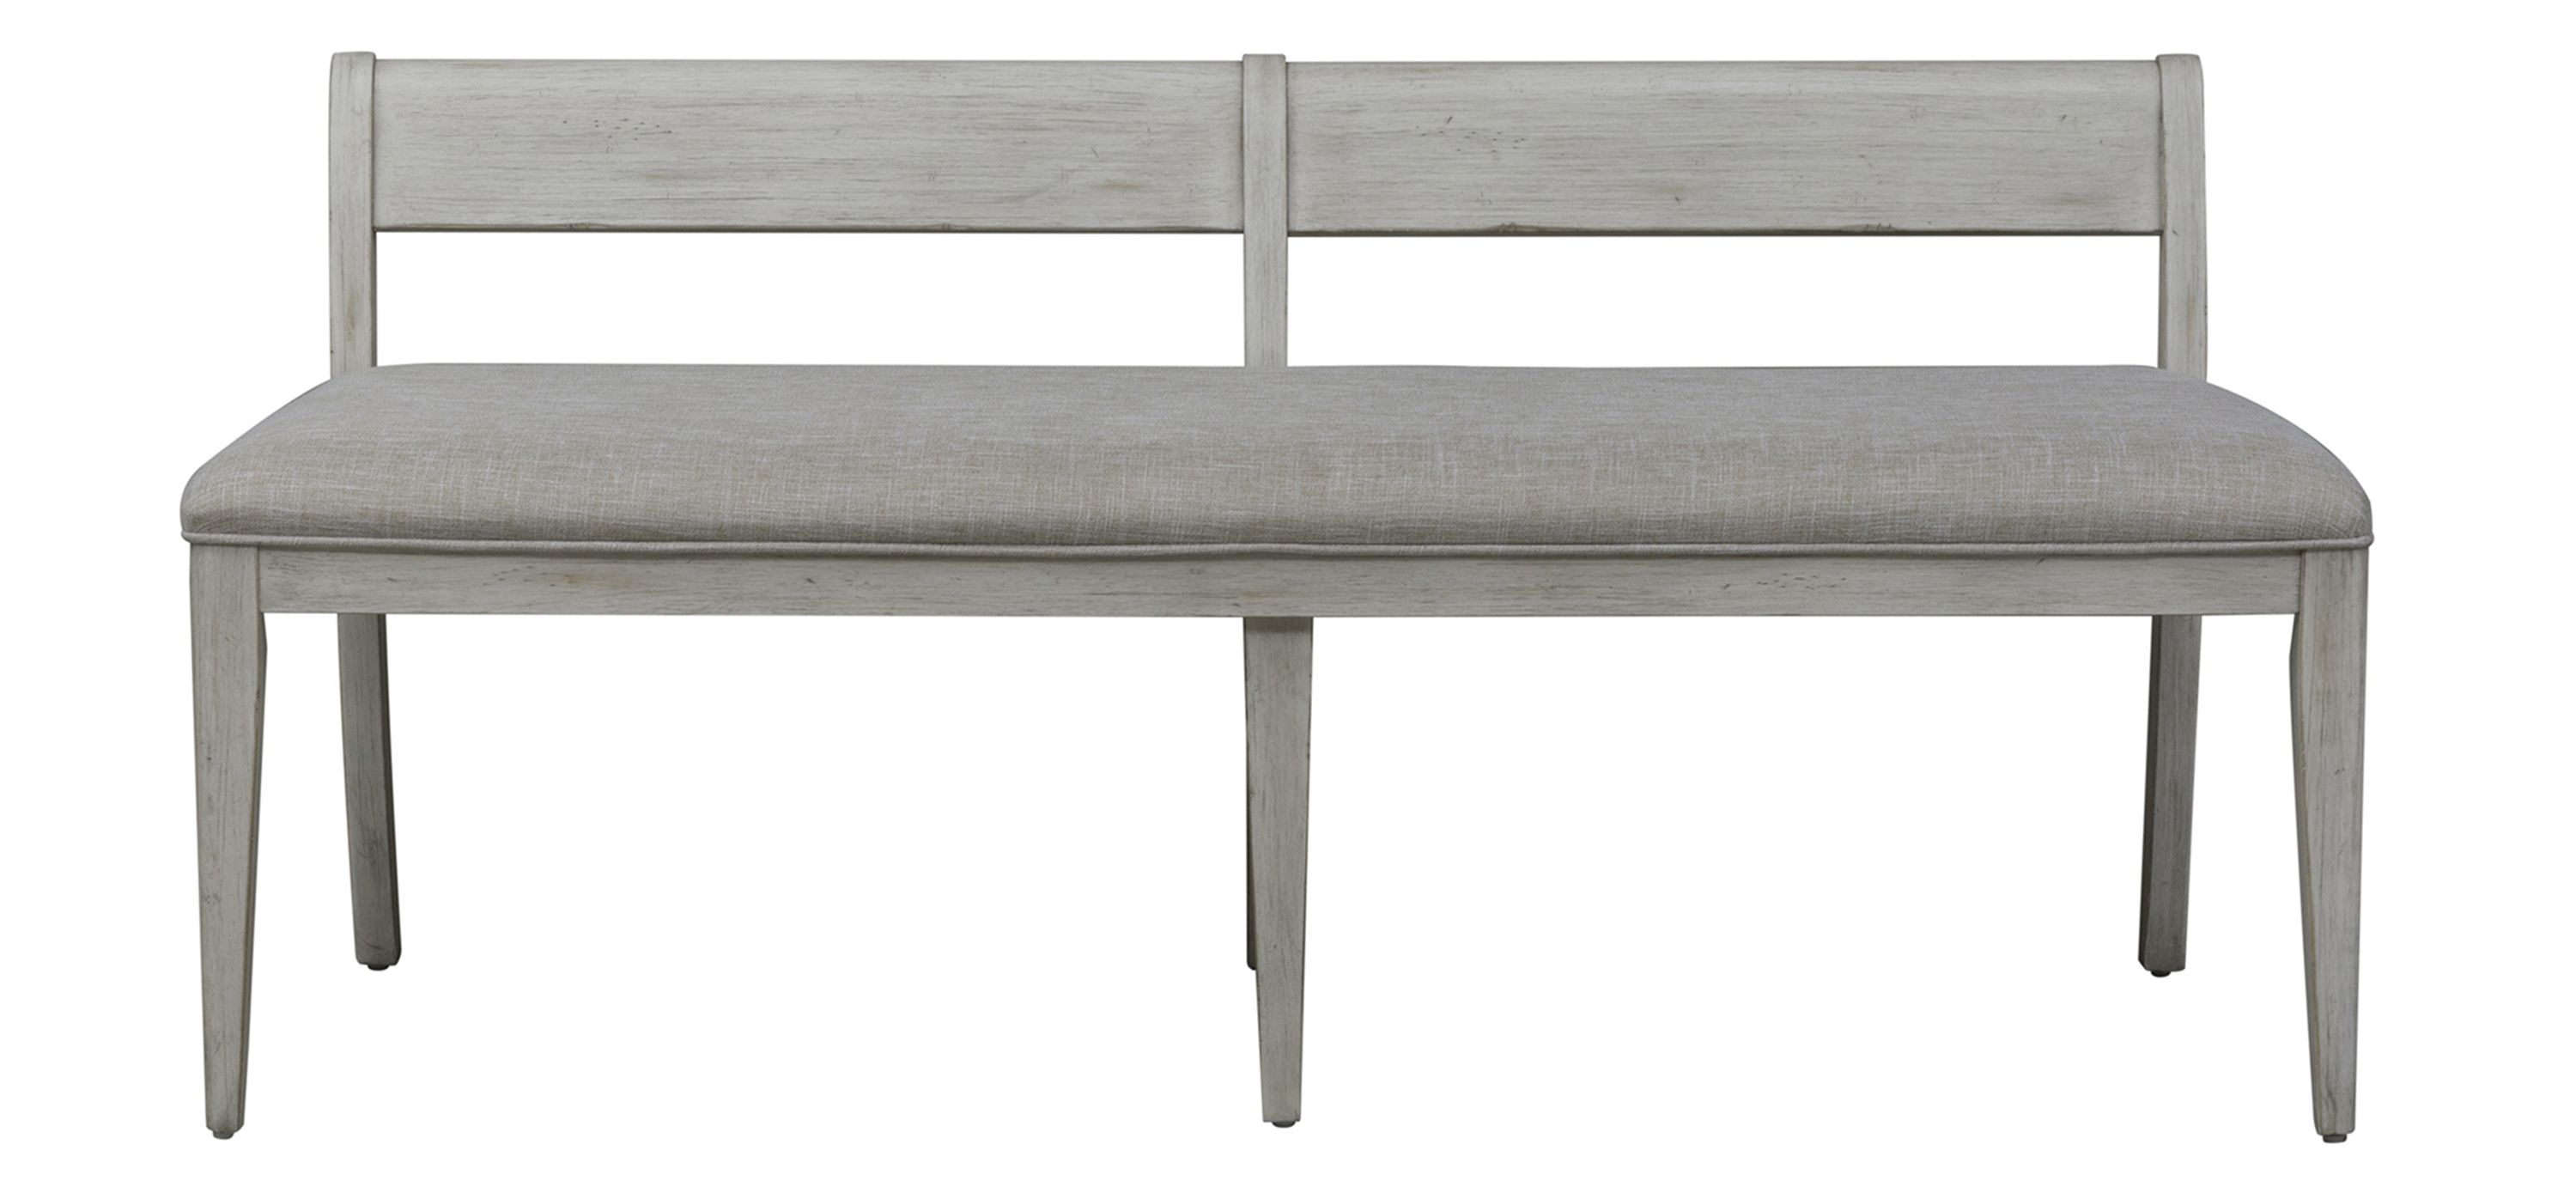 Farmhouse Reimagined Dining Bench